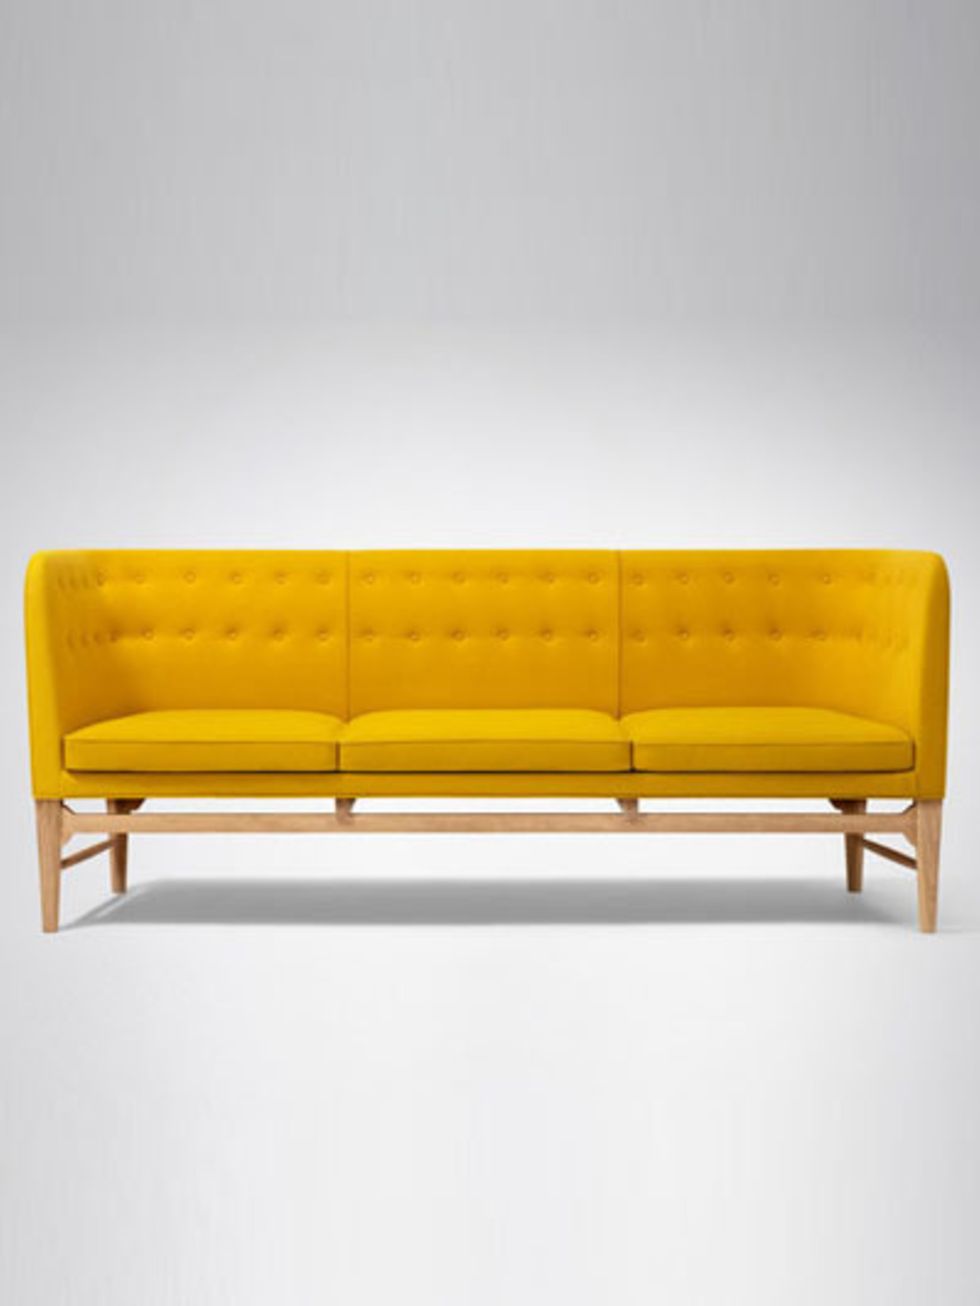 Wood, Brown, Yellow, Couch, Wall, Line, Furniture, Hardwood, Rectangle, Tan, 